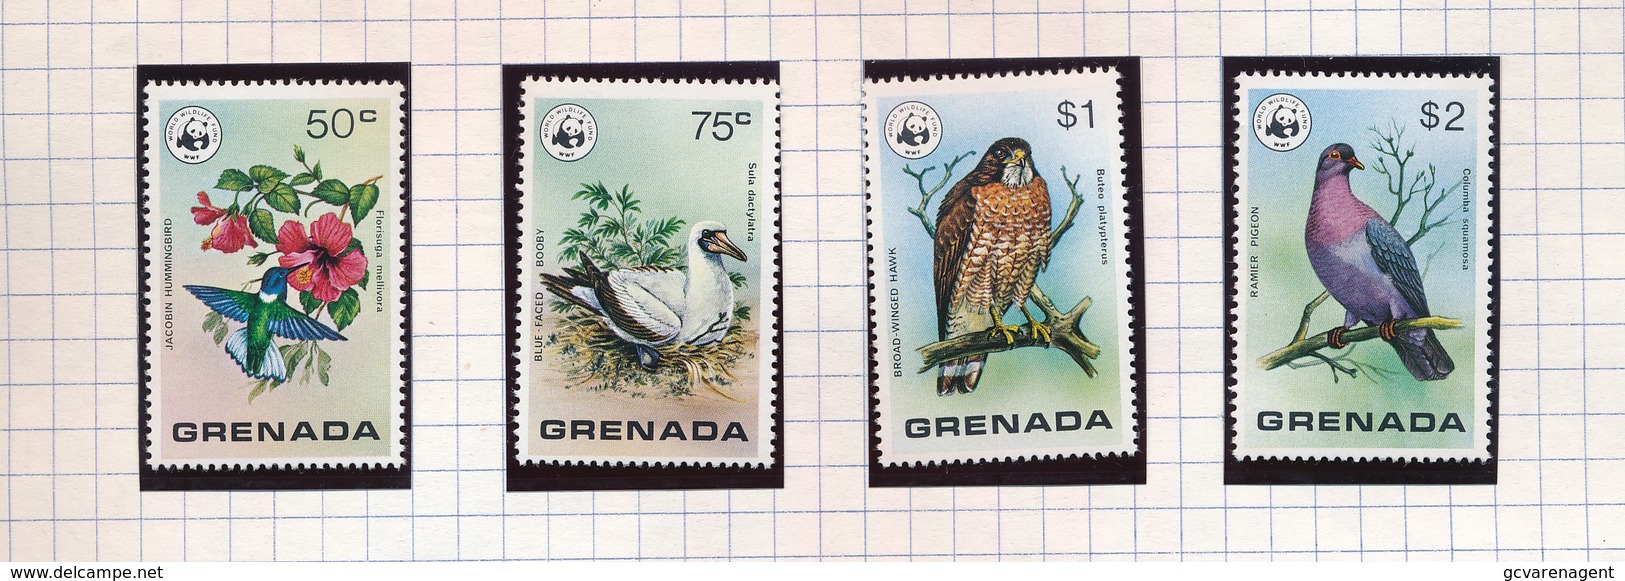 GRENADA  19?? _ 70 STAMPS NEW NEUF   3 SCANS - Grenade (1974-...)